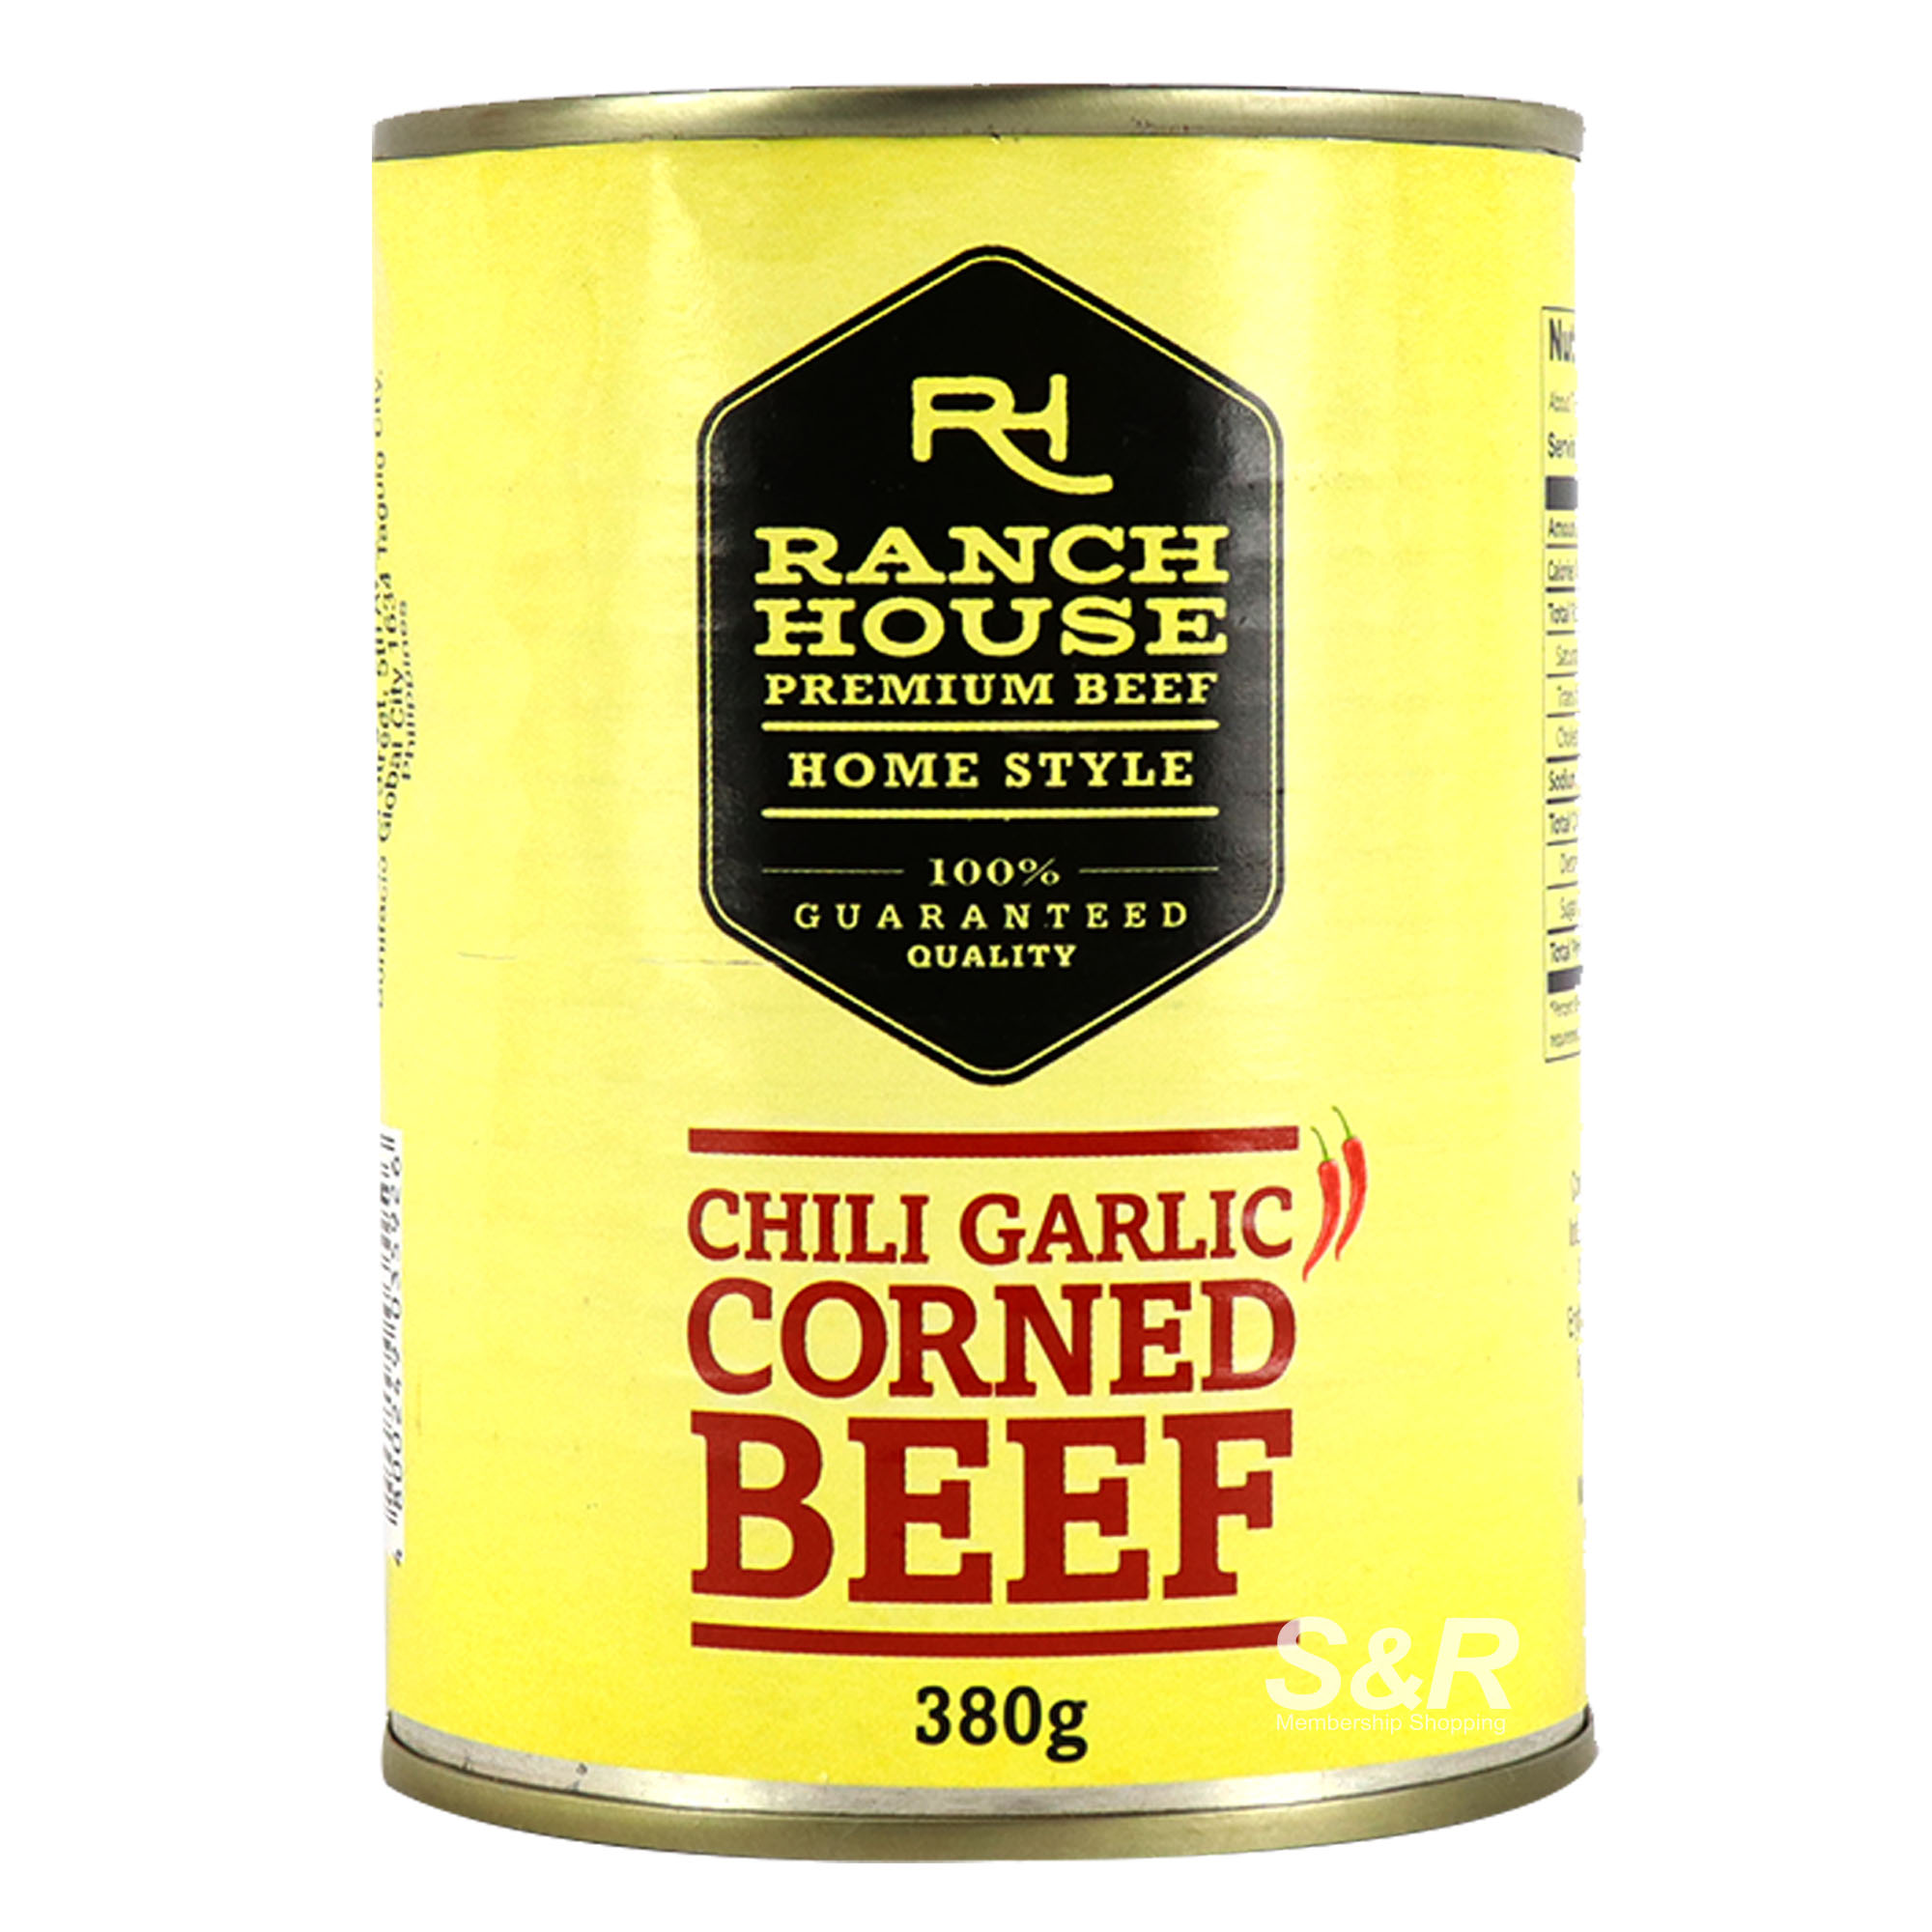 Ranch House Premium Beef Home Style Chili Garlic Corned Beef 380g